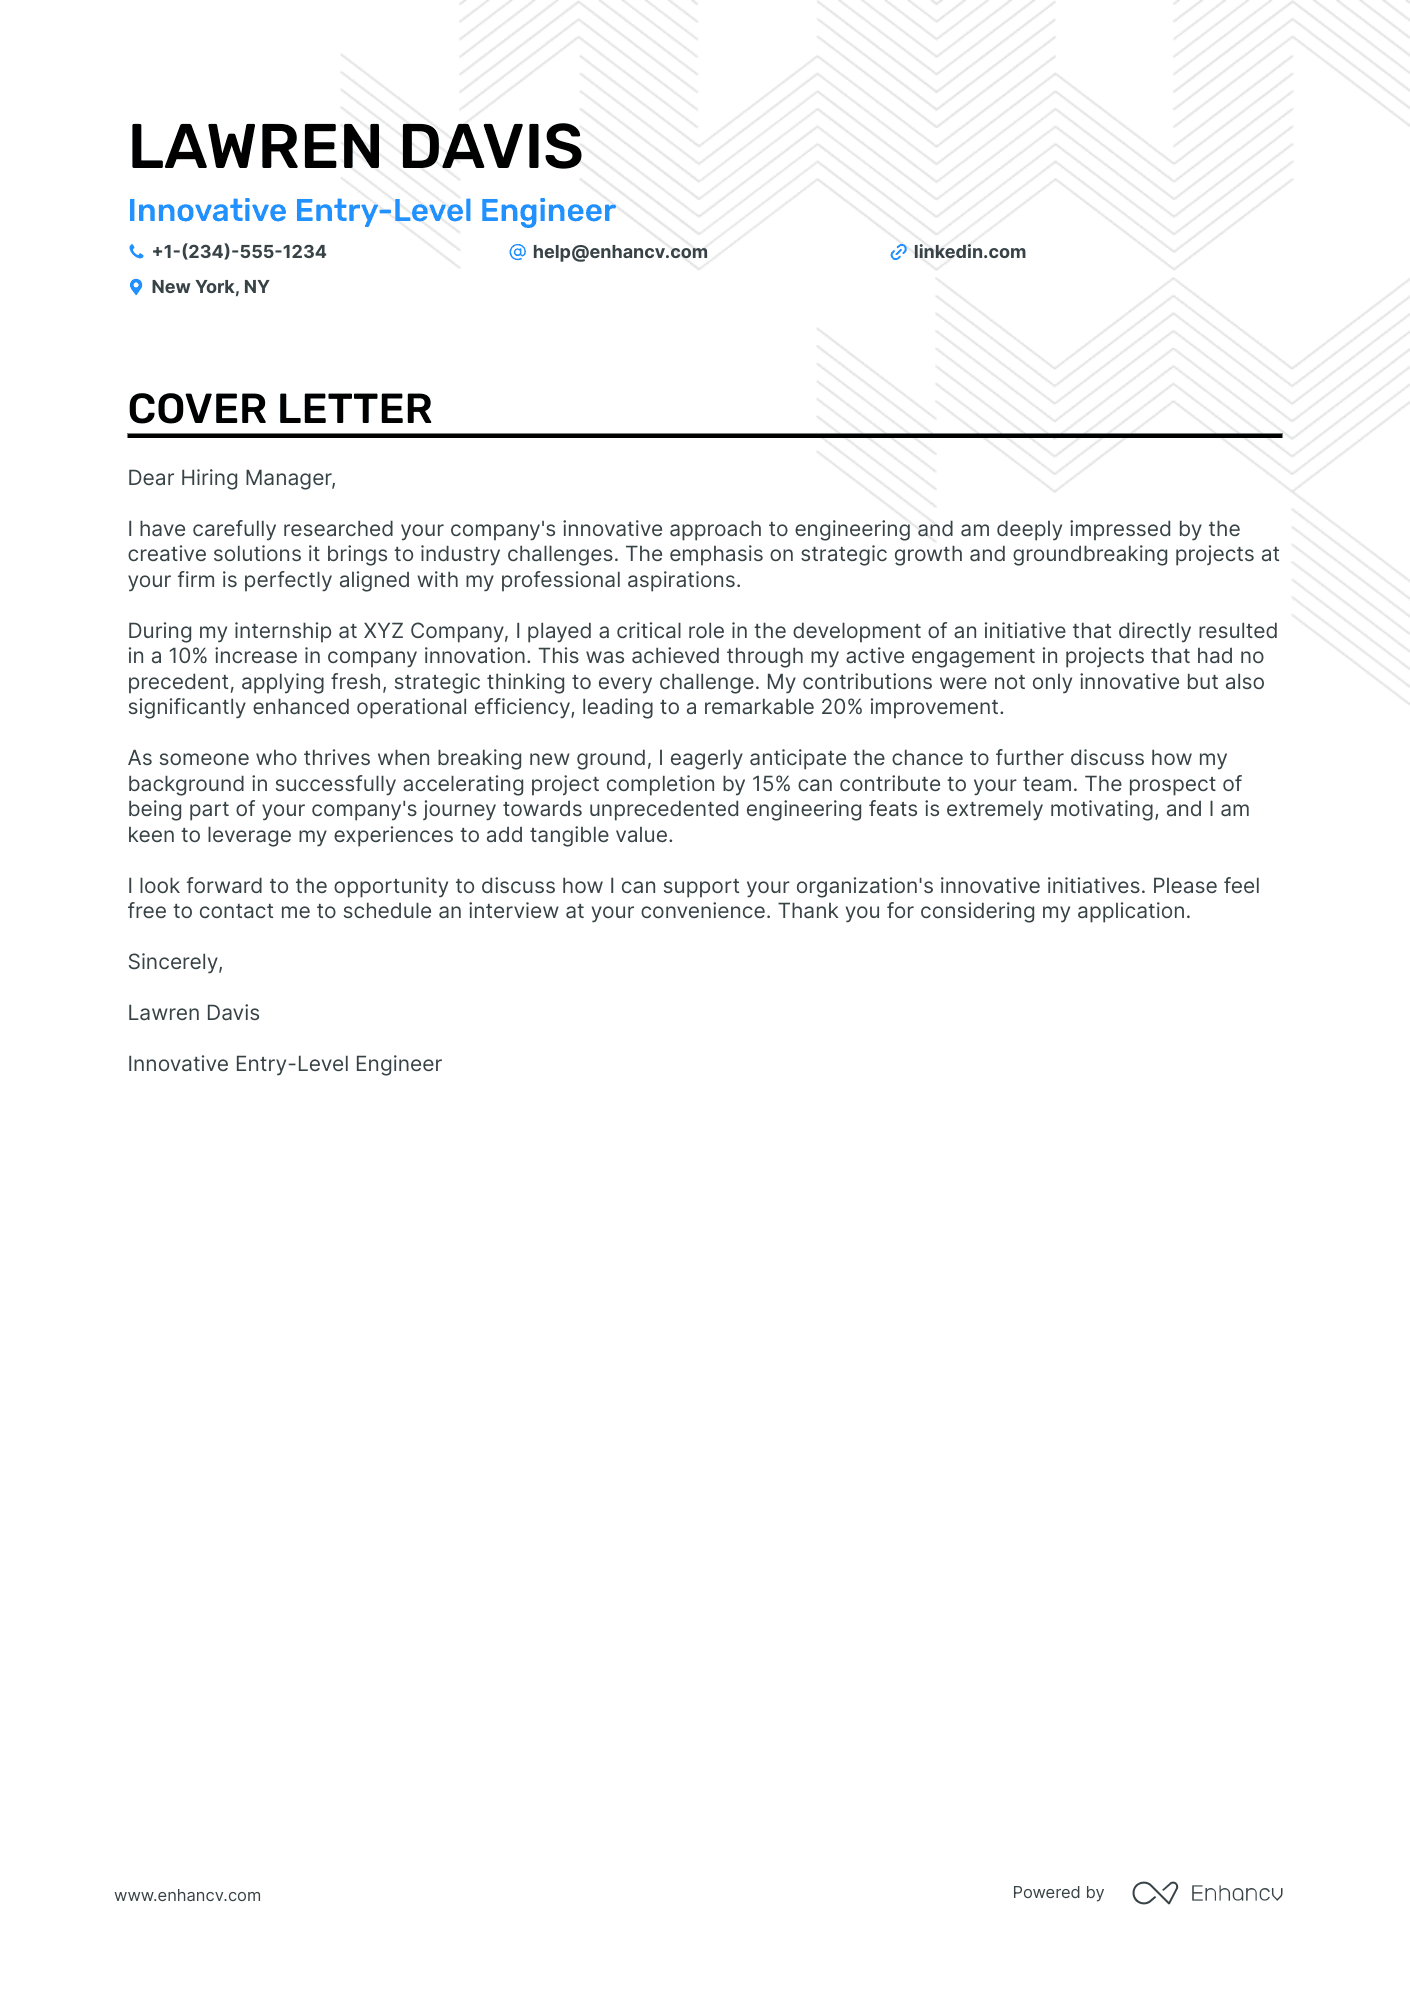 Entry Level Engineering cover letter